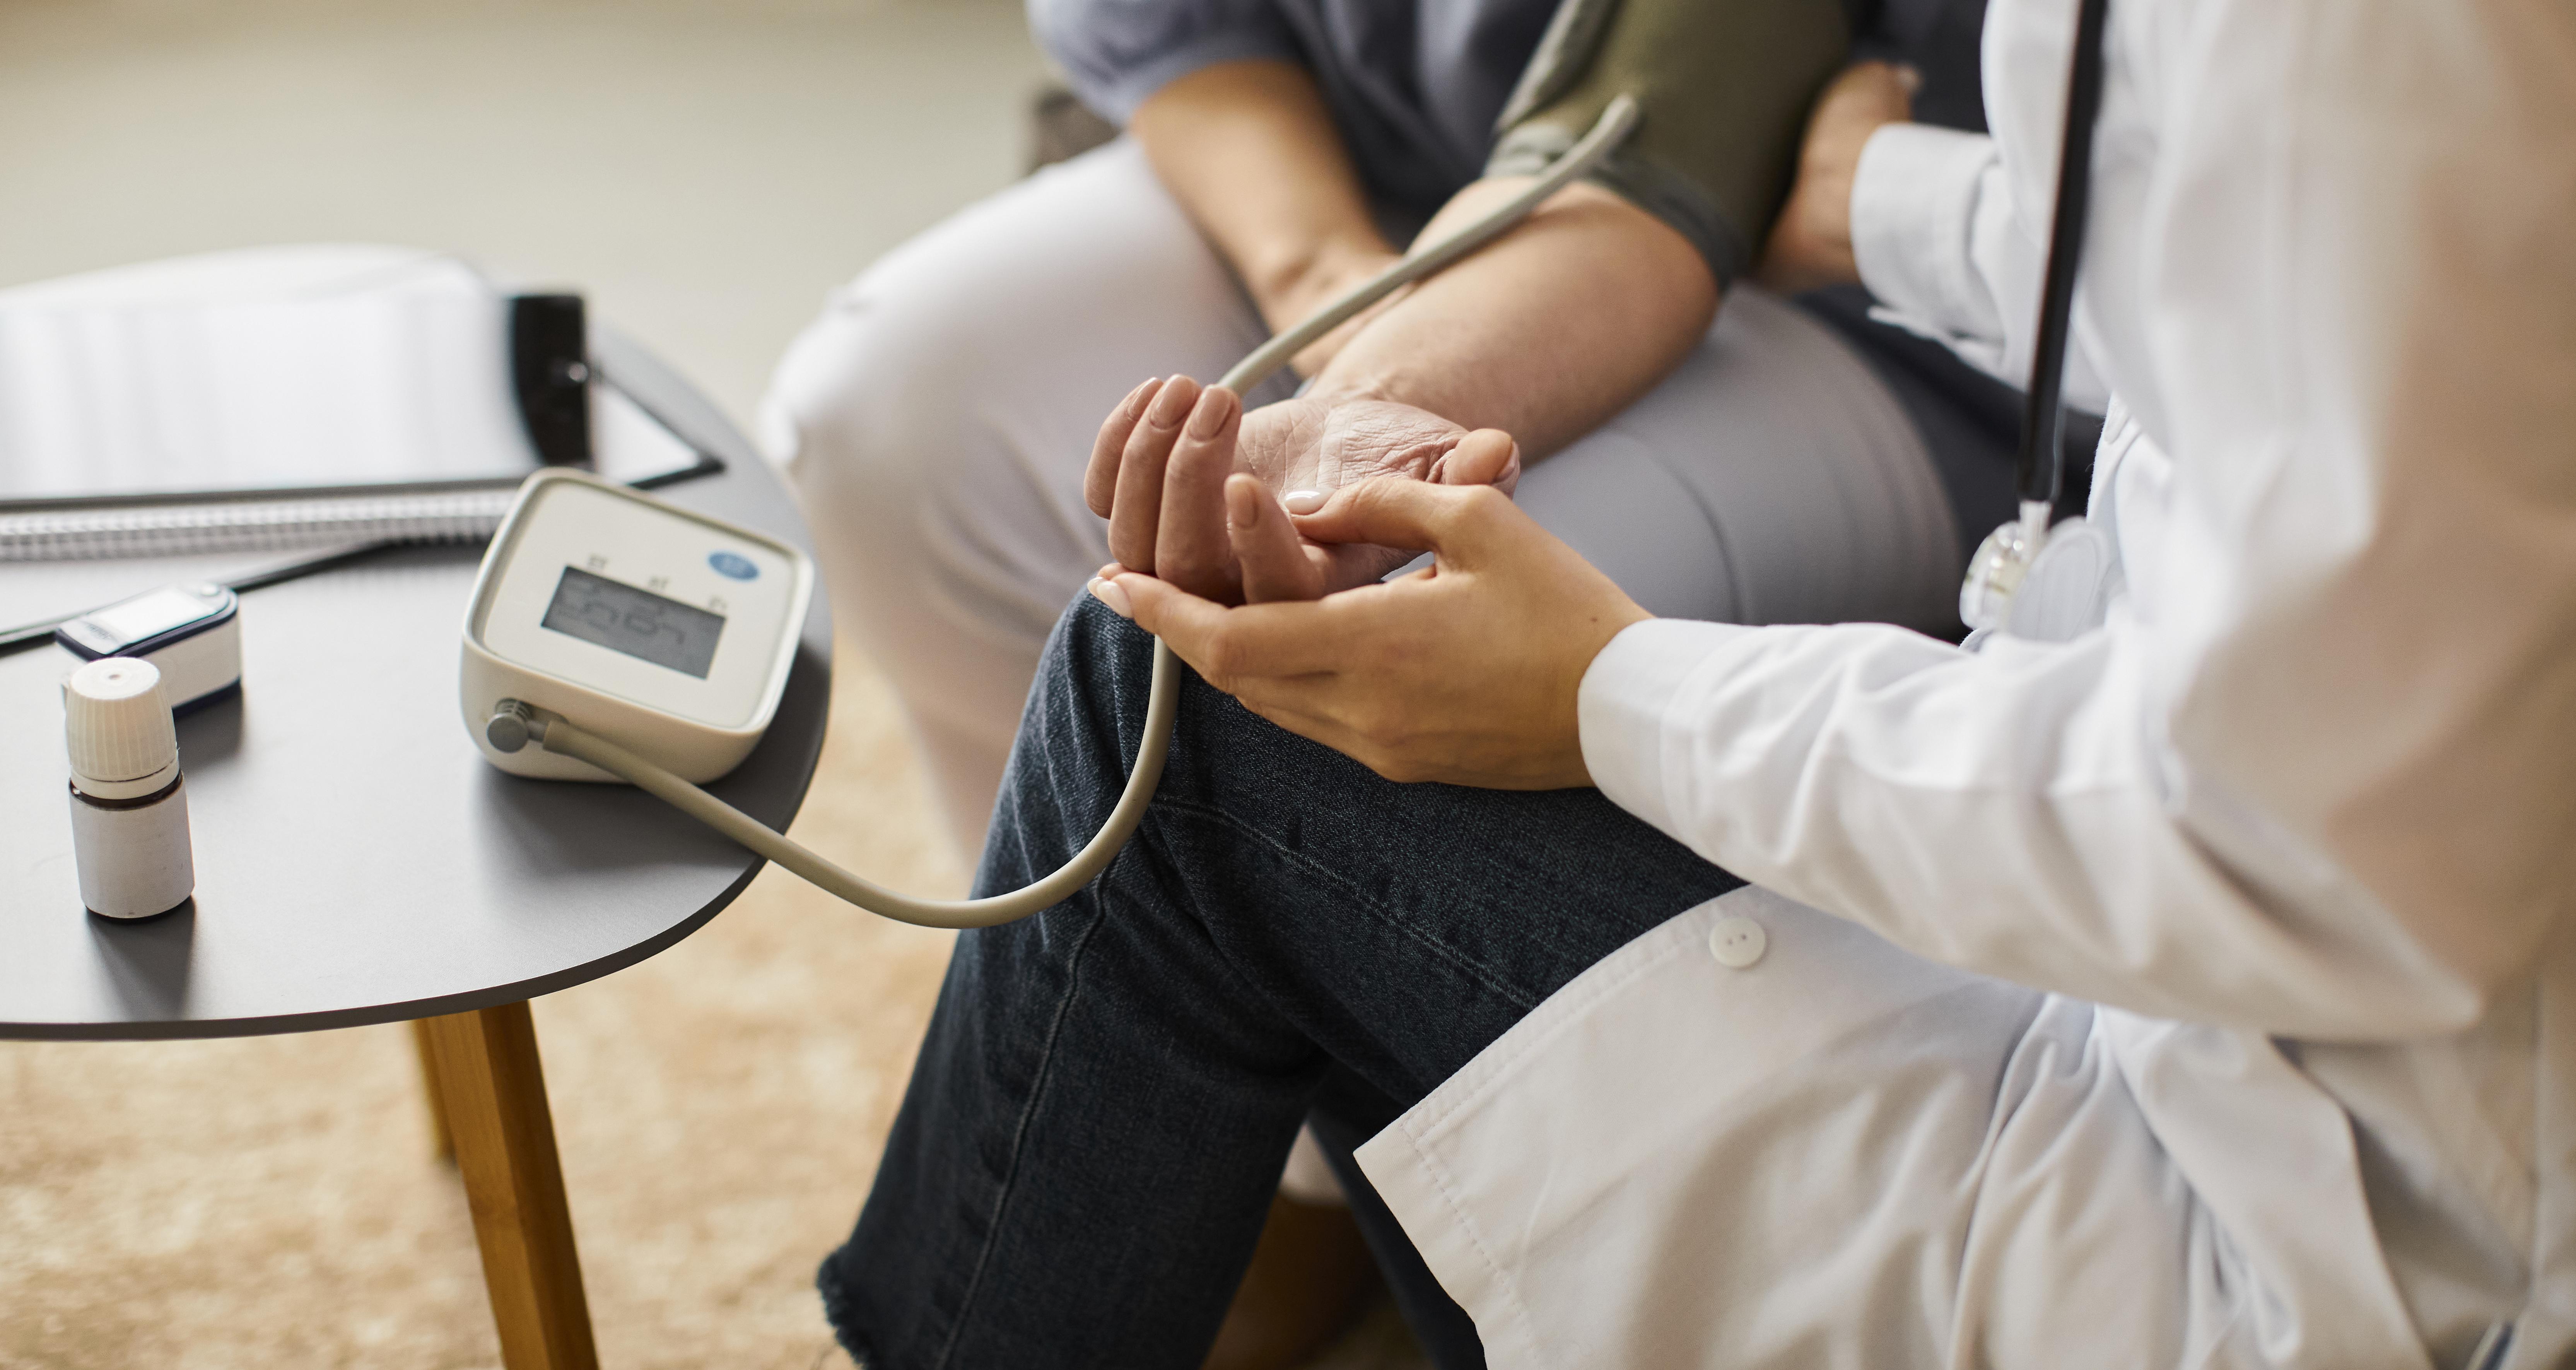 Low Blood pressure: Causes and Home remedies